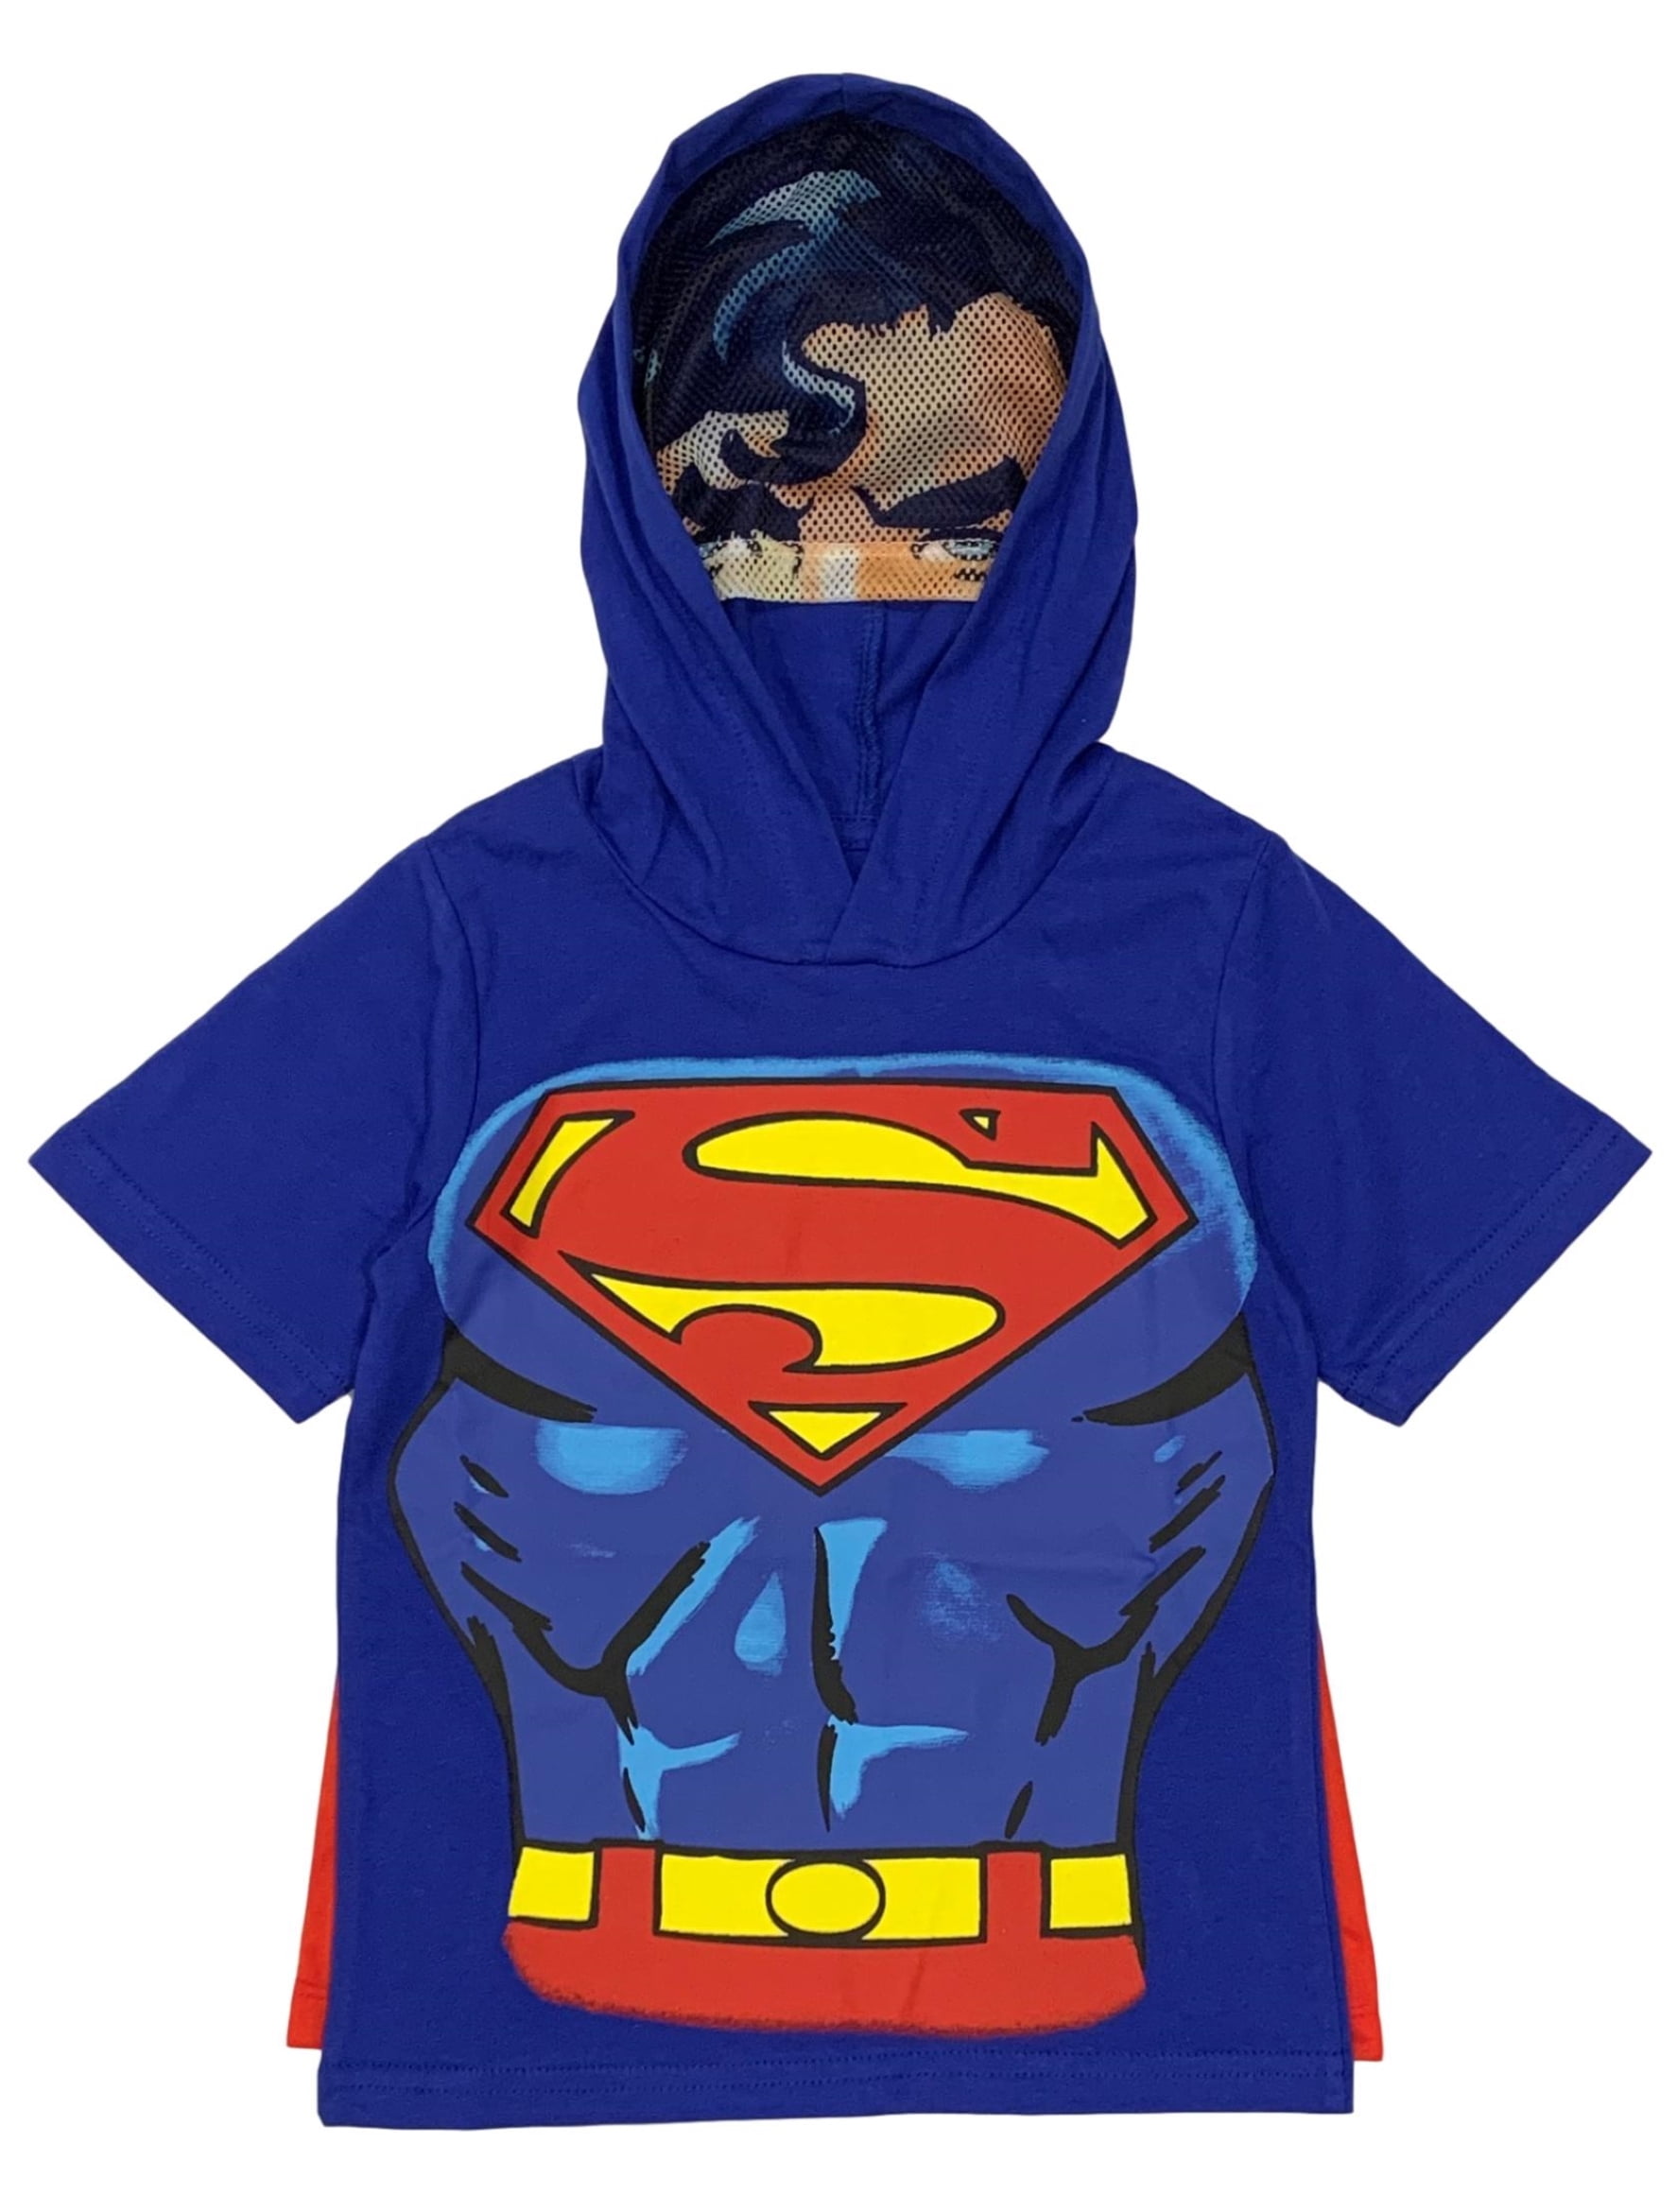 Super Heroes Little Boys Hooded Sweatshirts with Cape Toddler Sizes 2T-4T